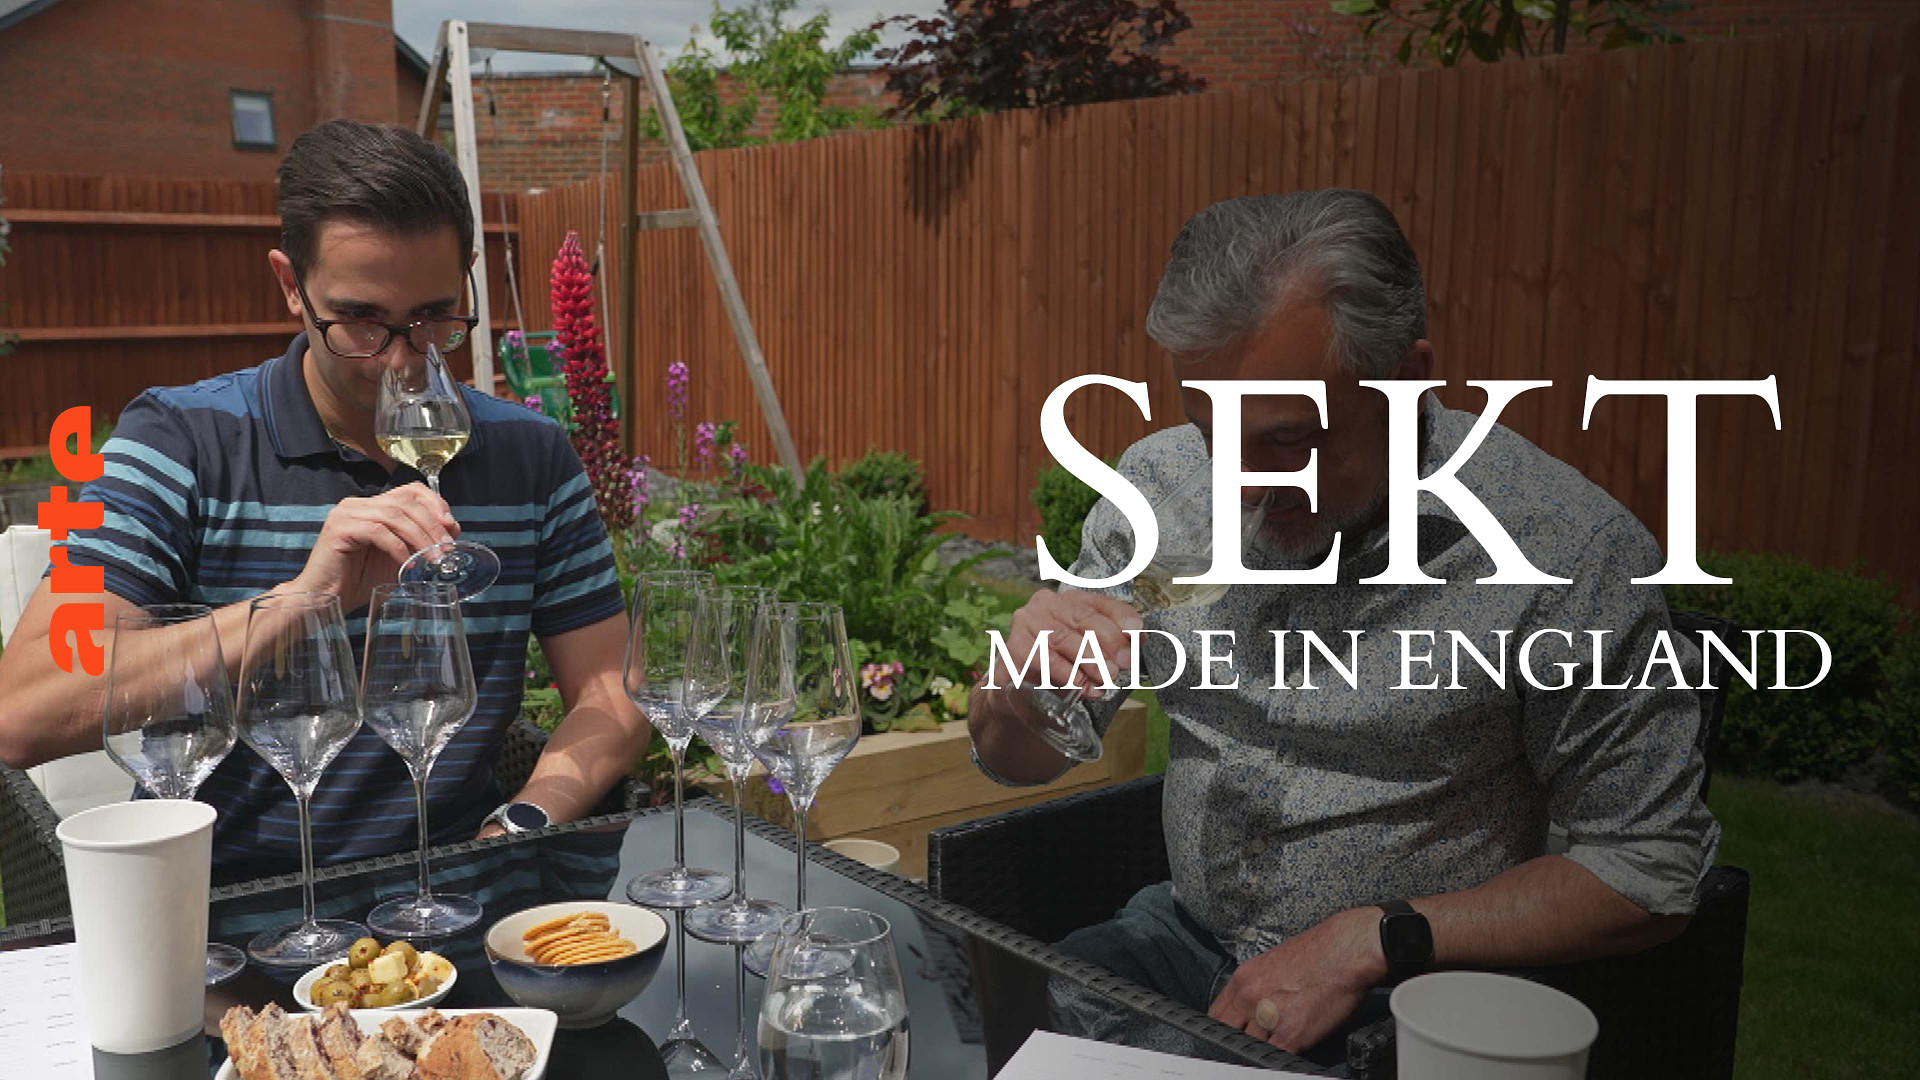 Re: Sekt, made in England